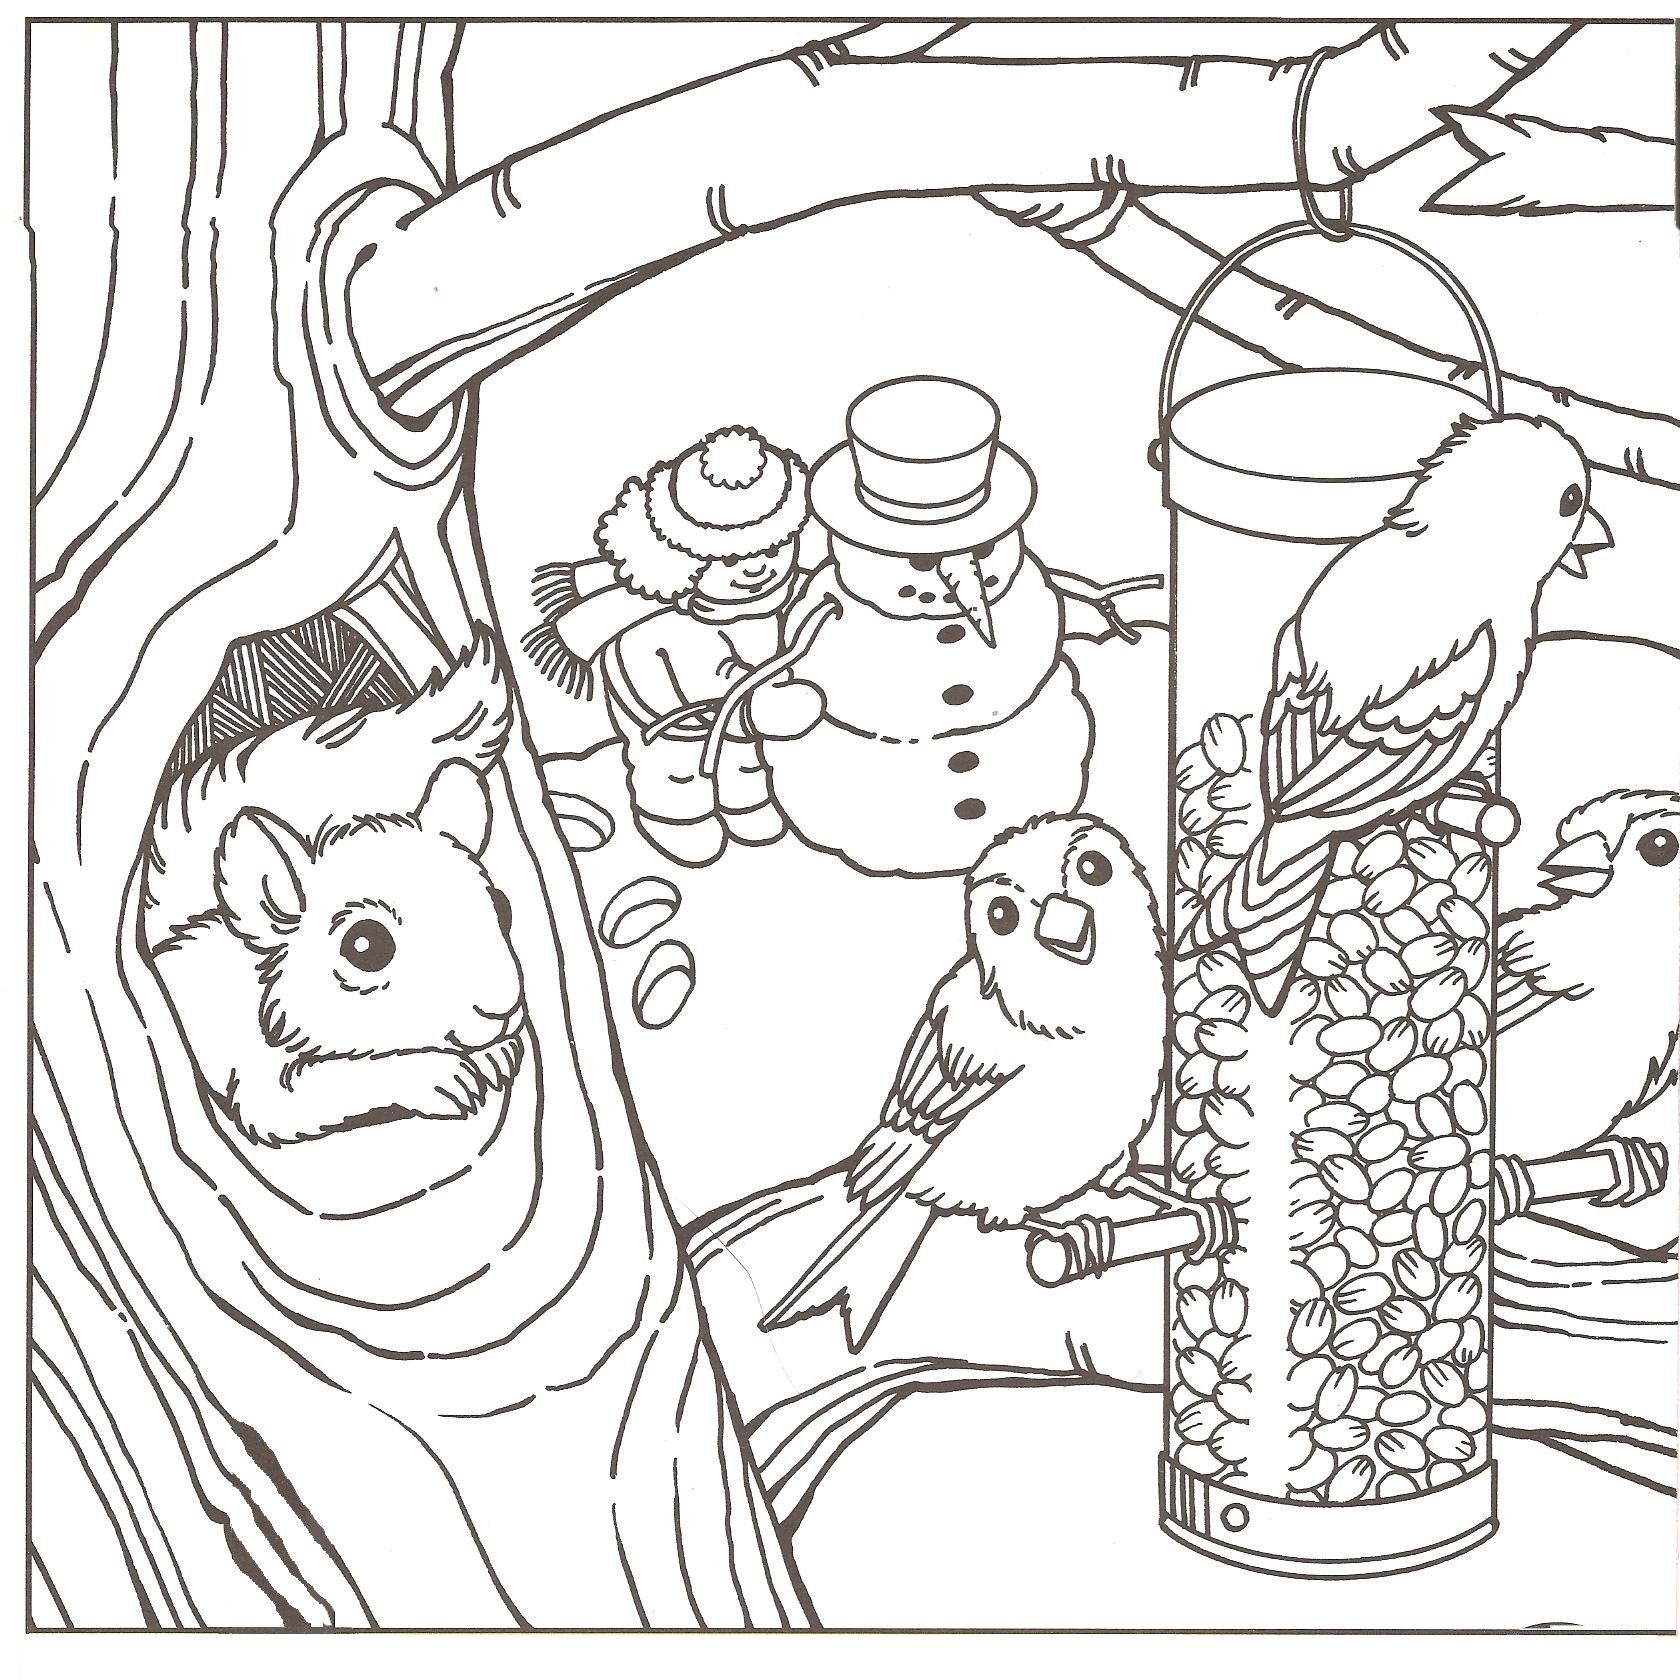 Free Printable Winter Coloring Pages Winter Mood Coloring Page Free Printable Pdf From 